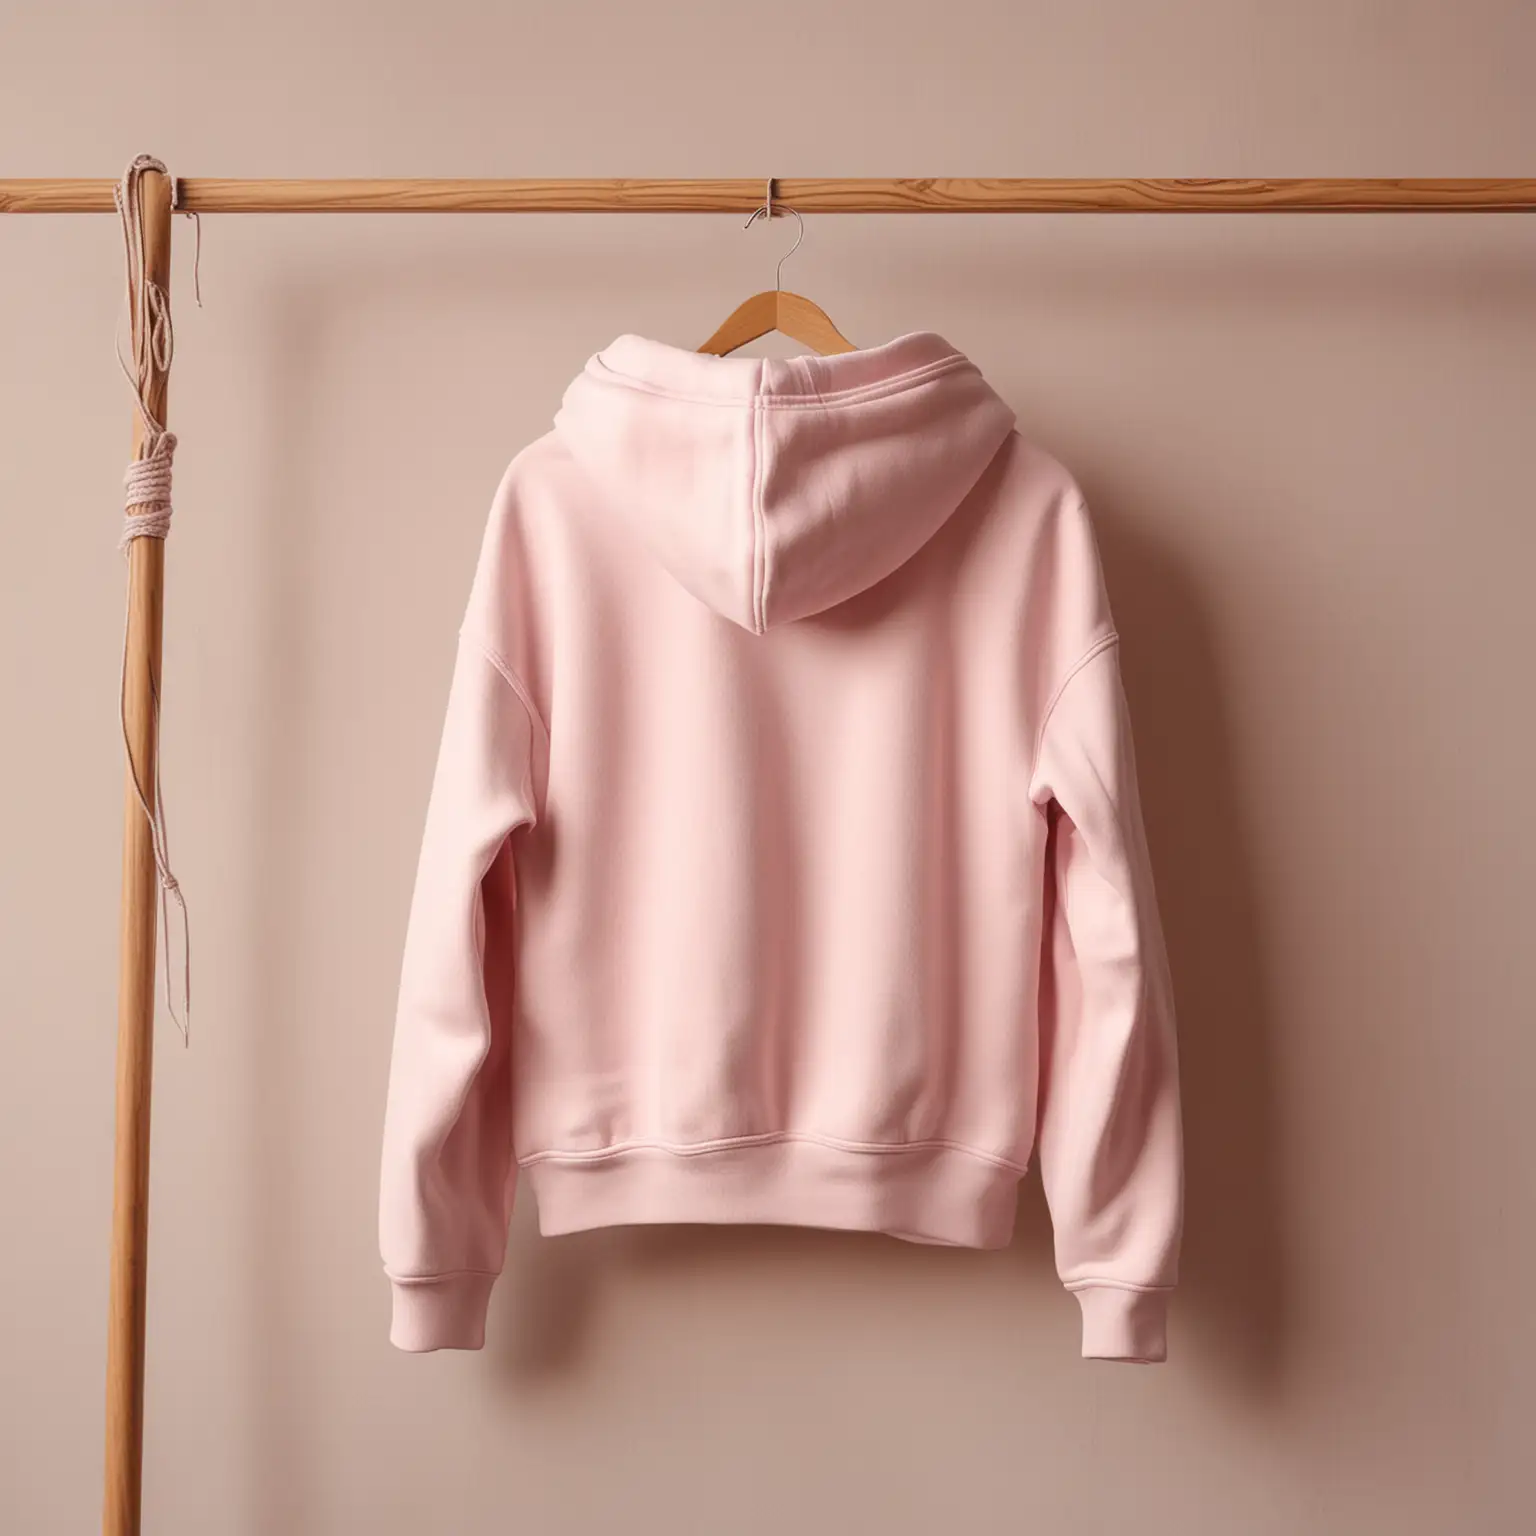 blank back of light pink hoodie on hanger,  hanger is hanging on a wooden pole in an aesthetic room
